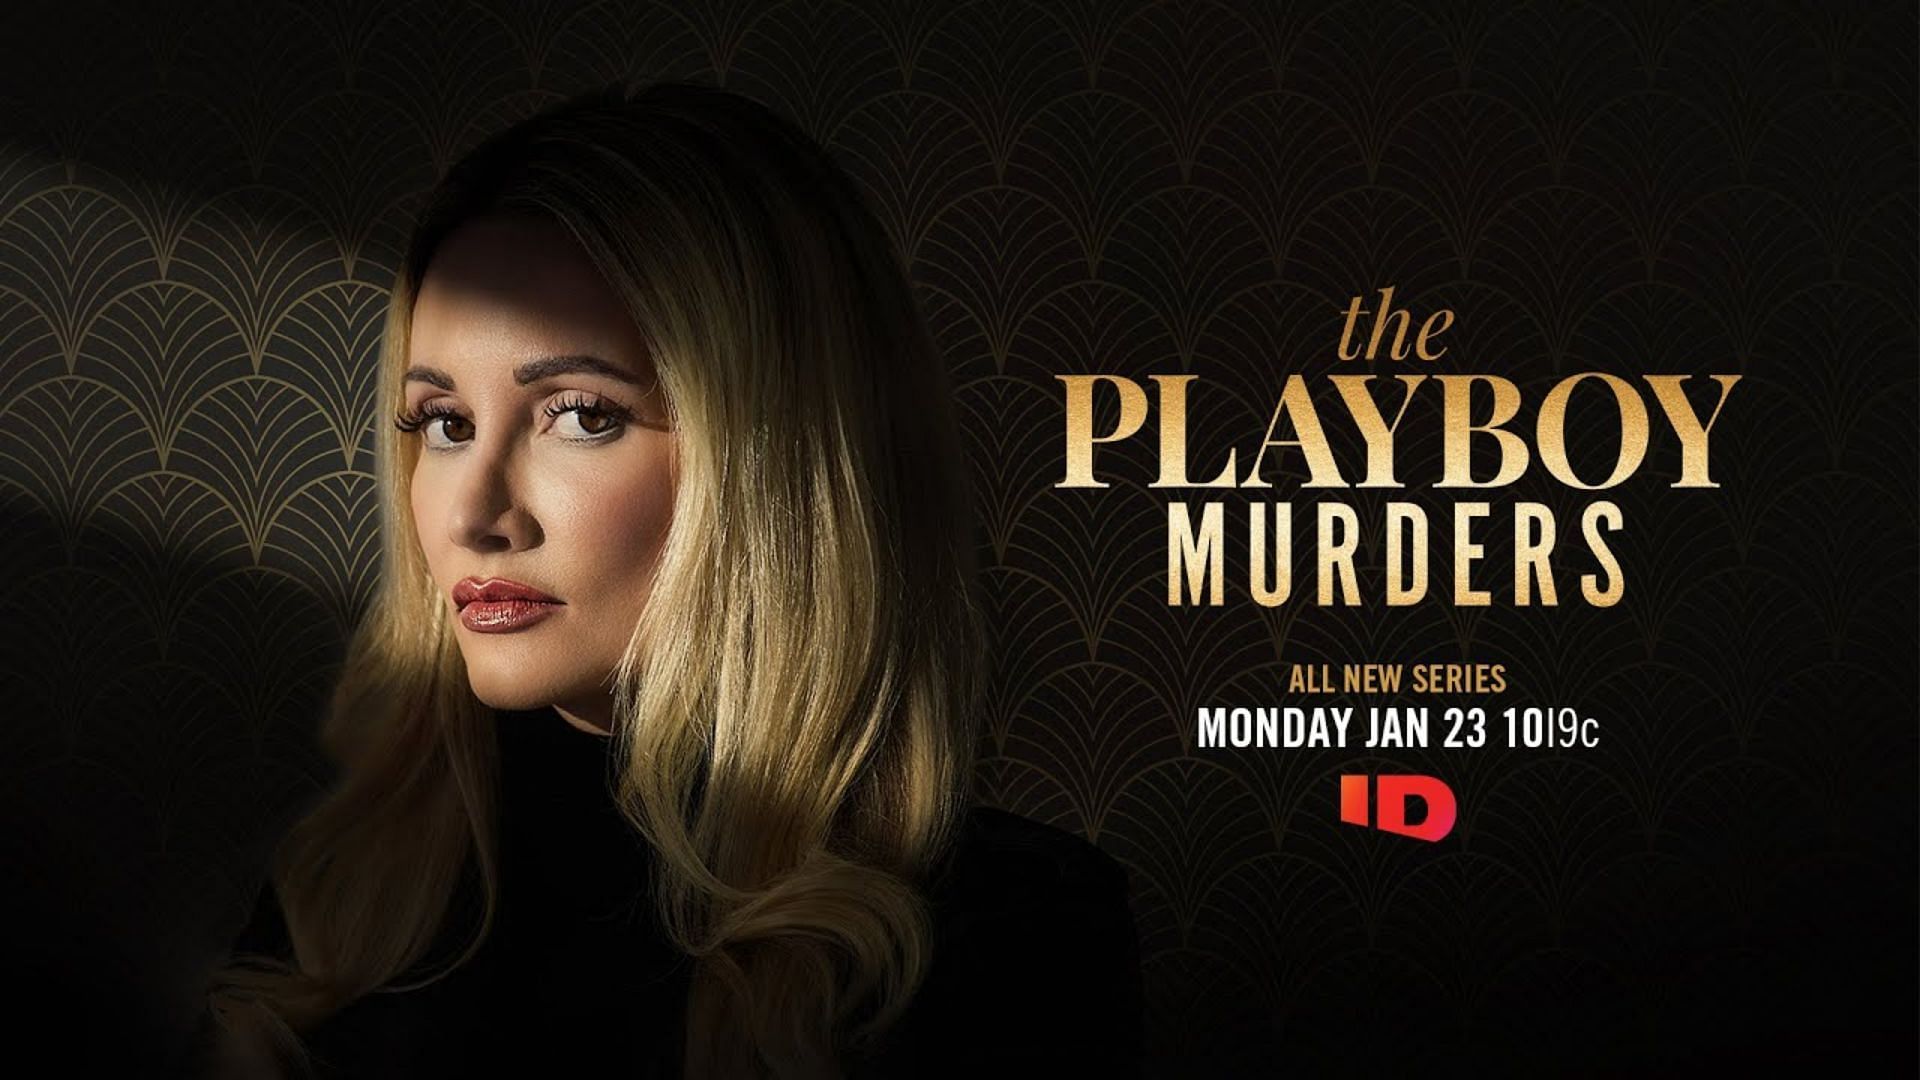 Playboy Murders is set to be a six-part weekly series that will expose the darkness behind the glamorous lives of popular celebrities